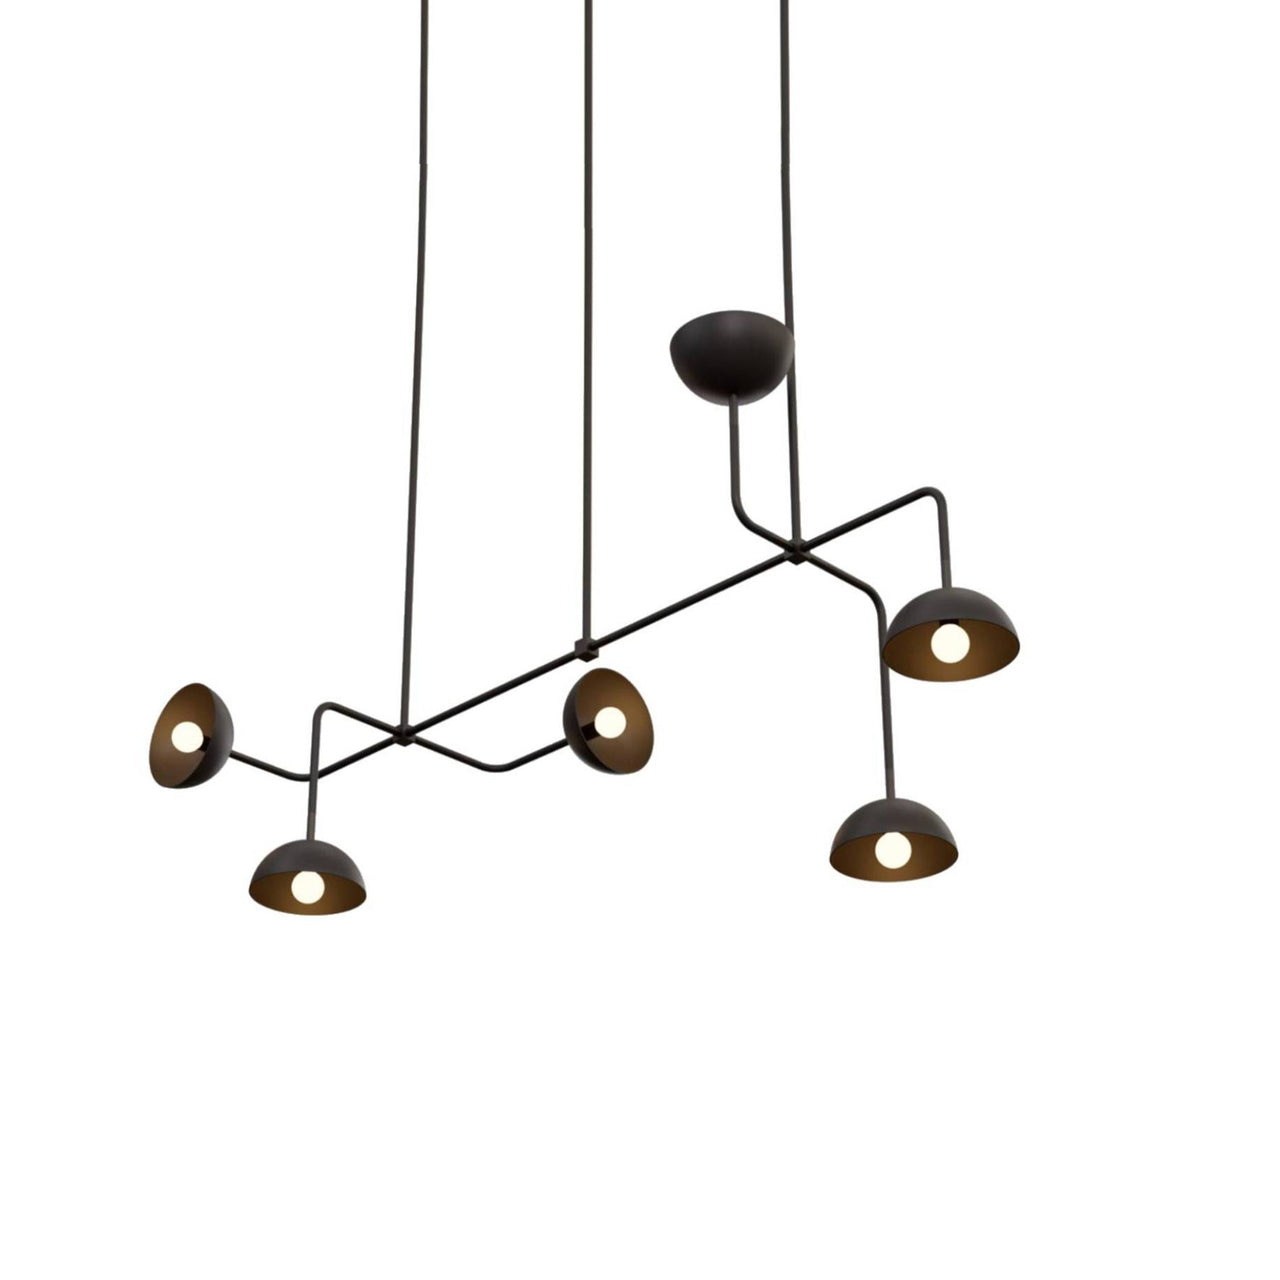 Beaubien Suspension 08 Lamp with Domes: Graphite